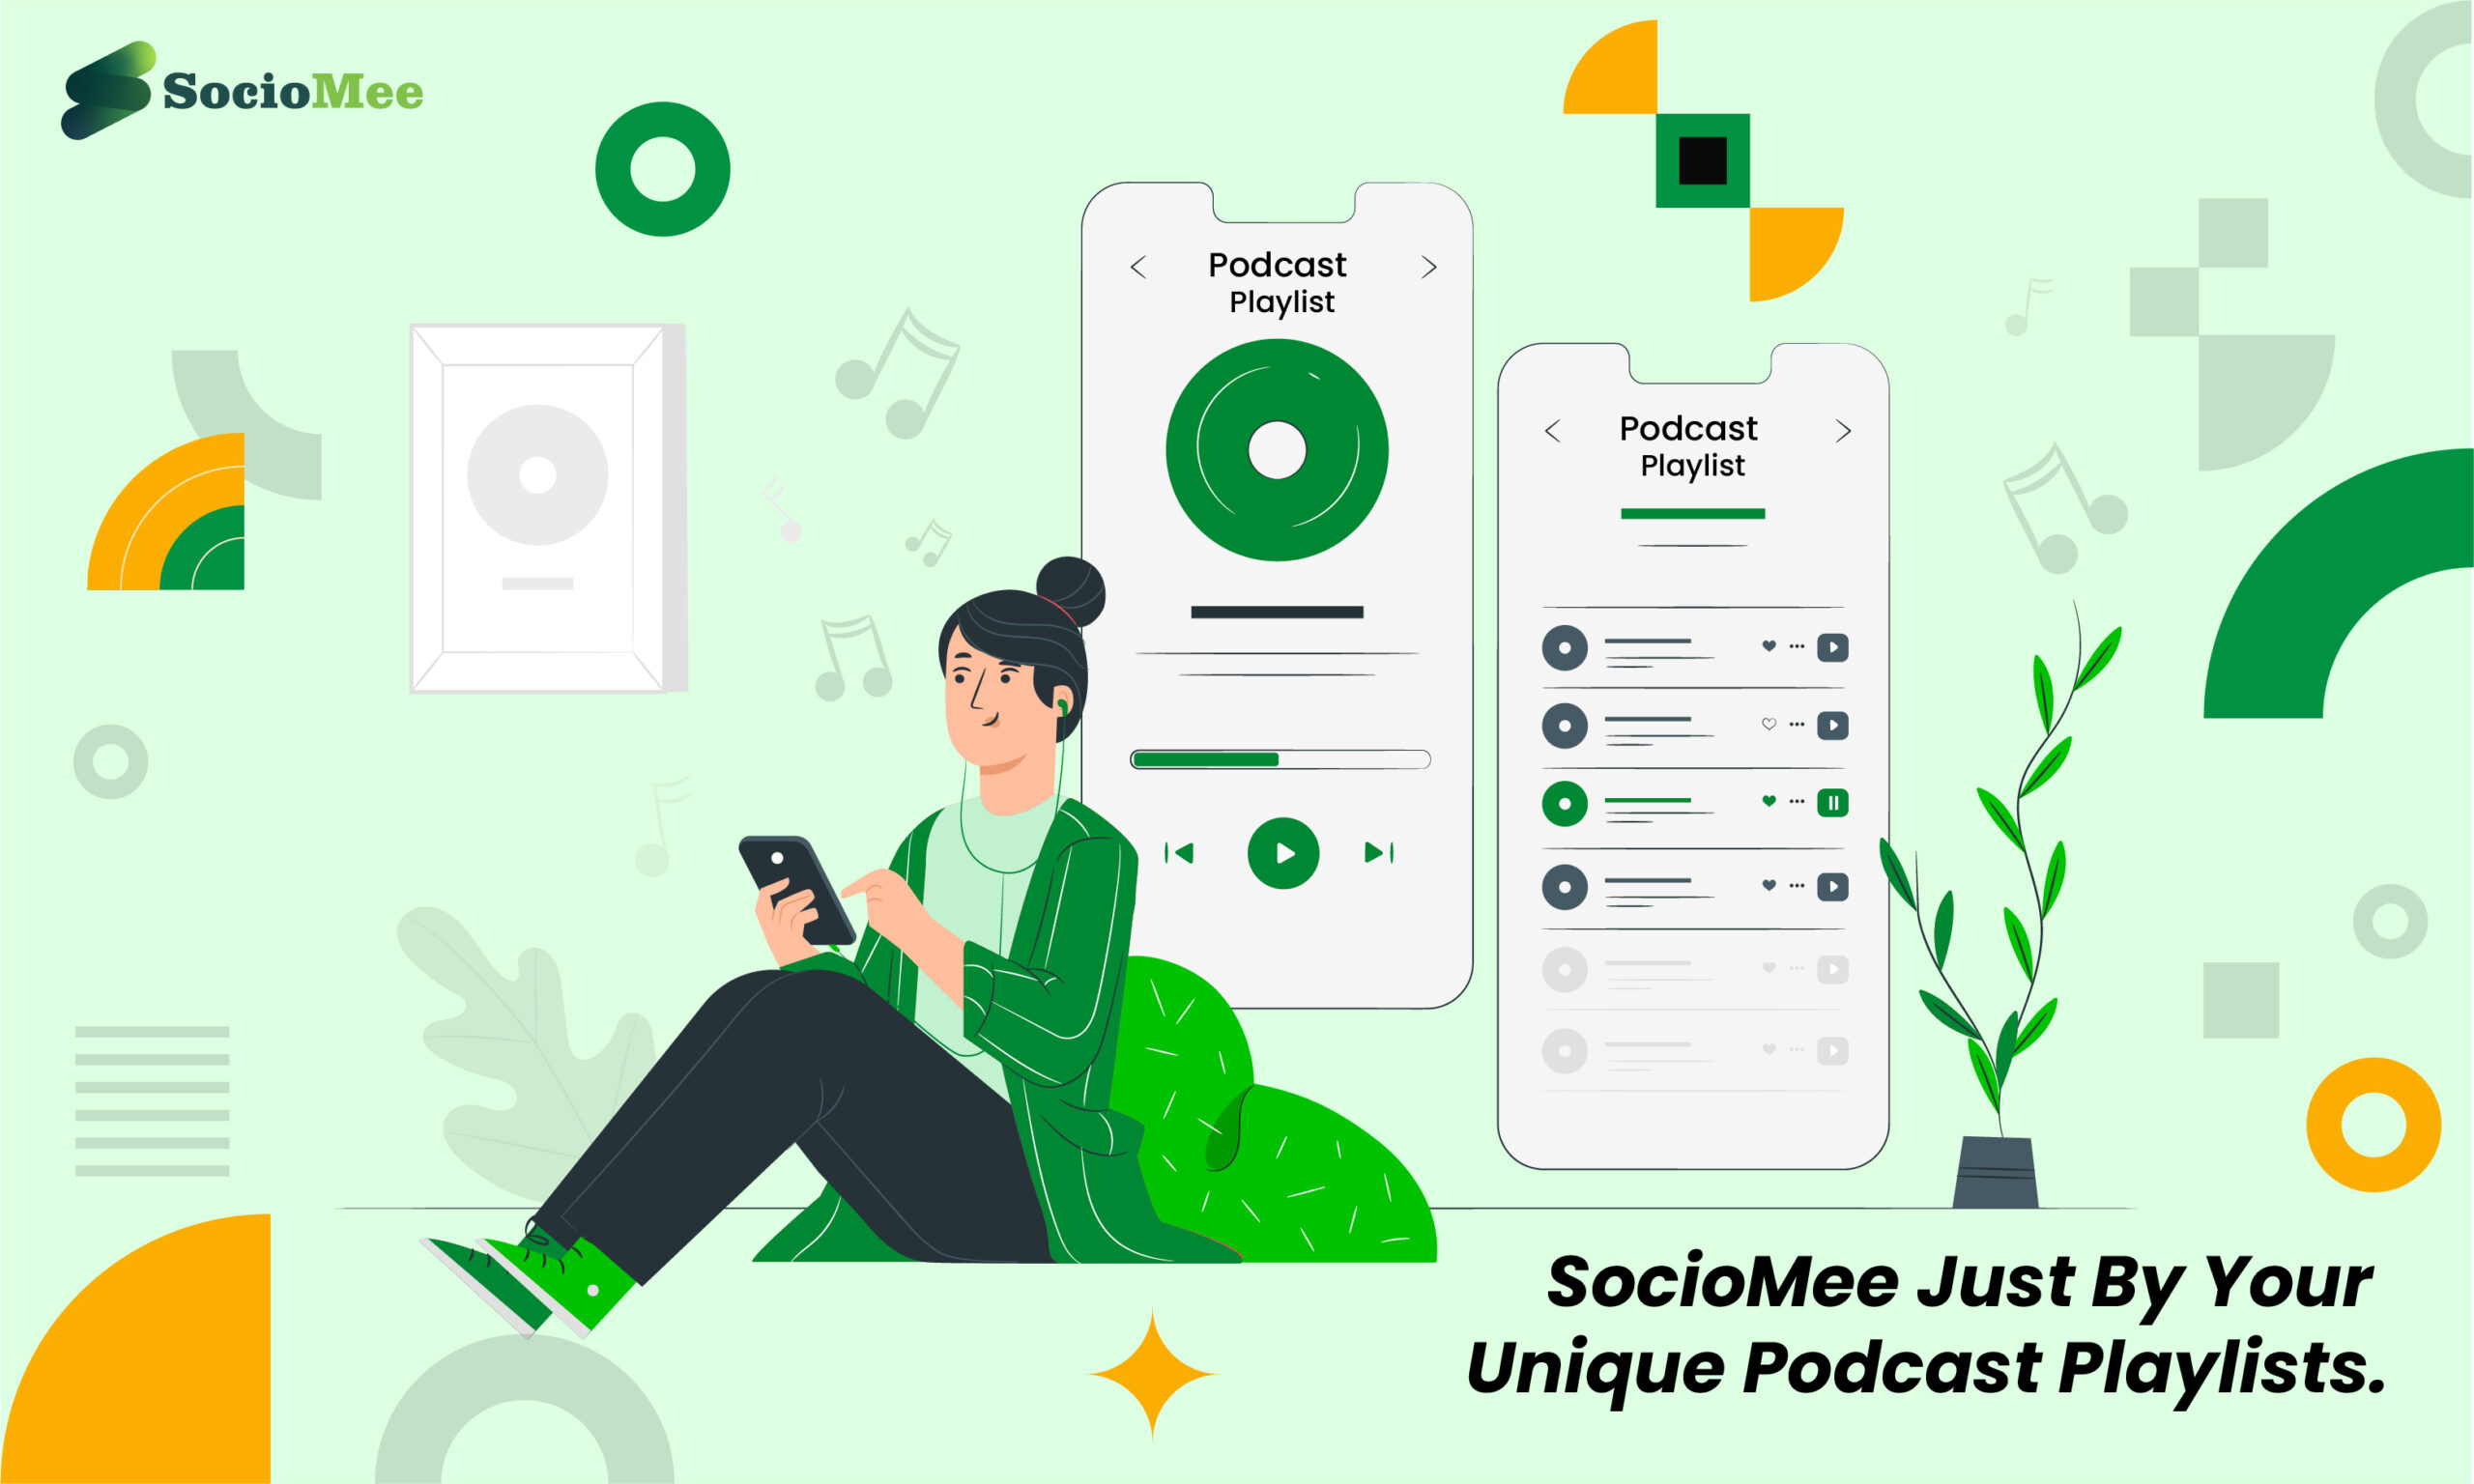 Time To Get Started With the New Reward $SOCIOMEE Just By Your Unique Podcast Playlists.